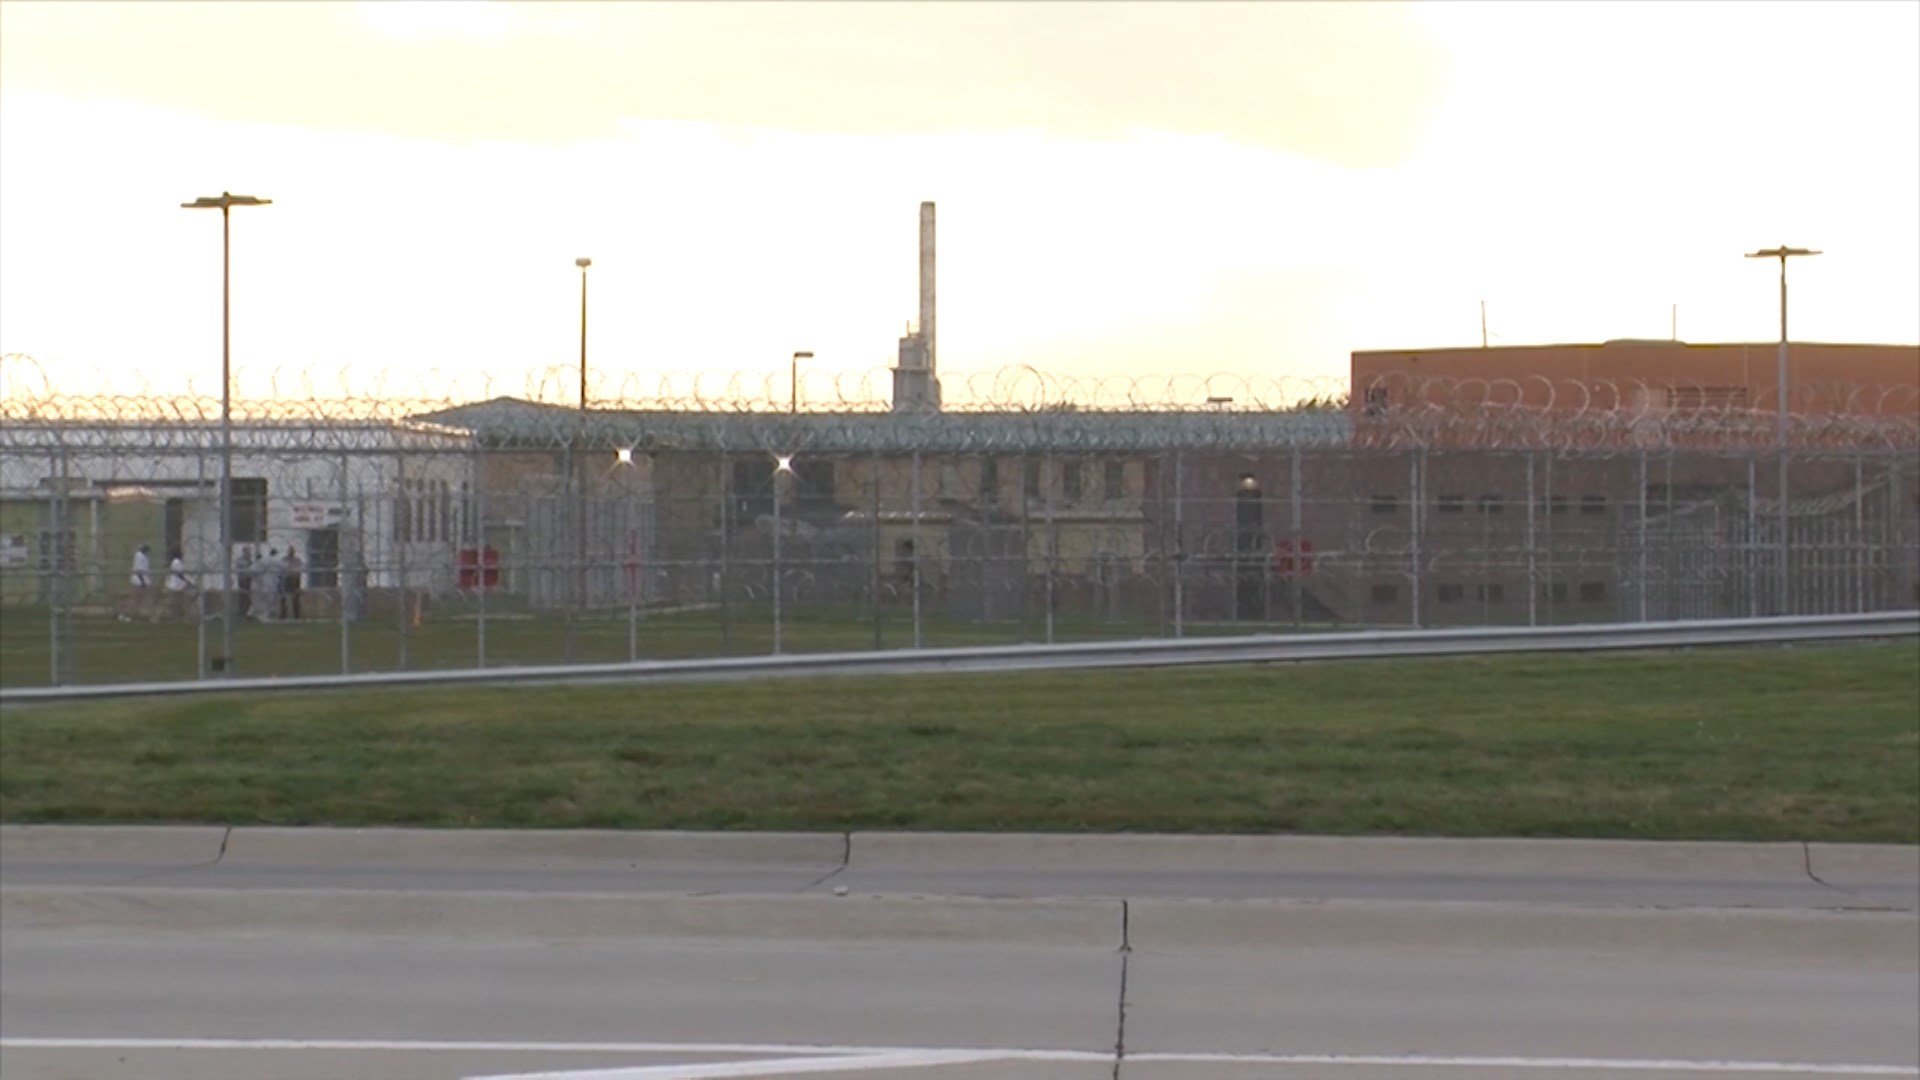 Inmate assaults 2 staff members, one seriously injured, officials say